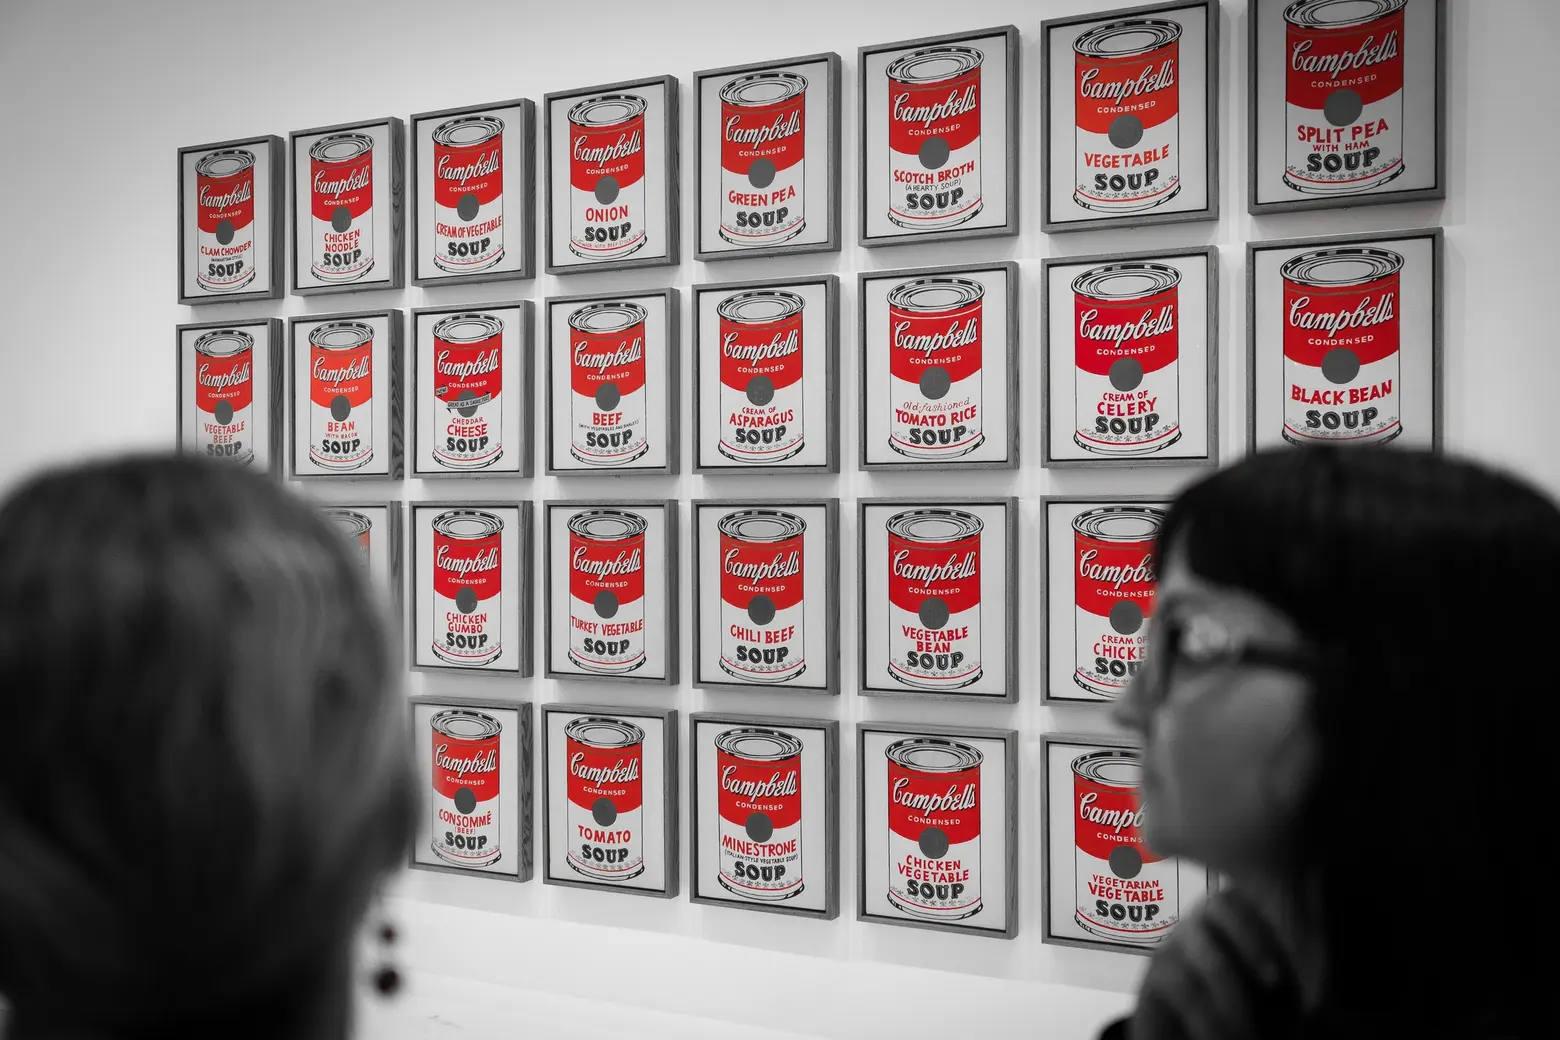 Details revealed for the Whitney Museum’s upcoming Warhol exhibit